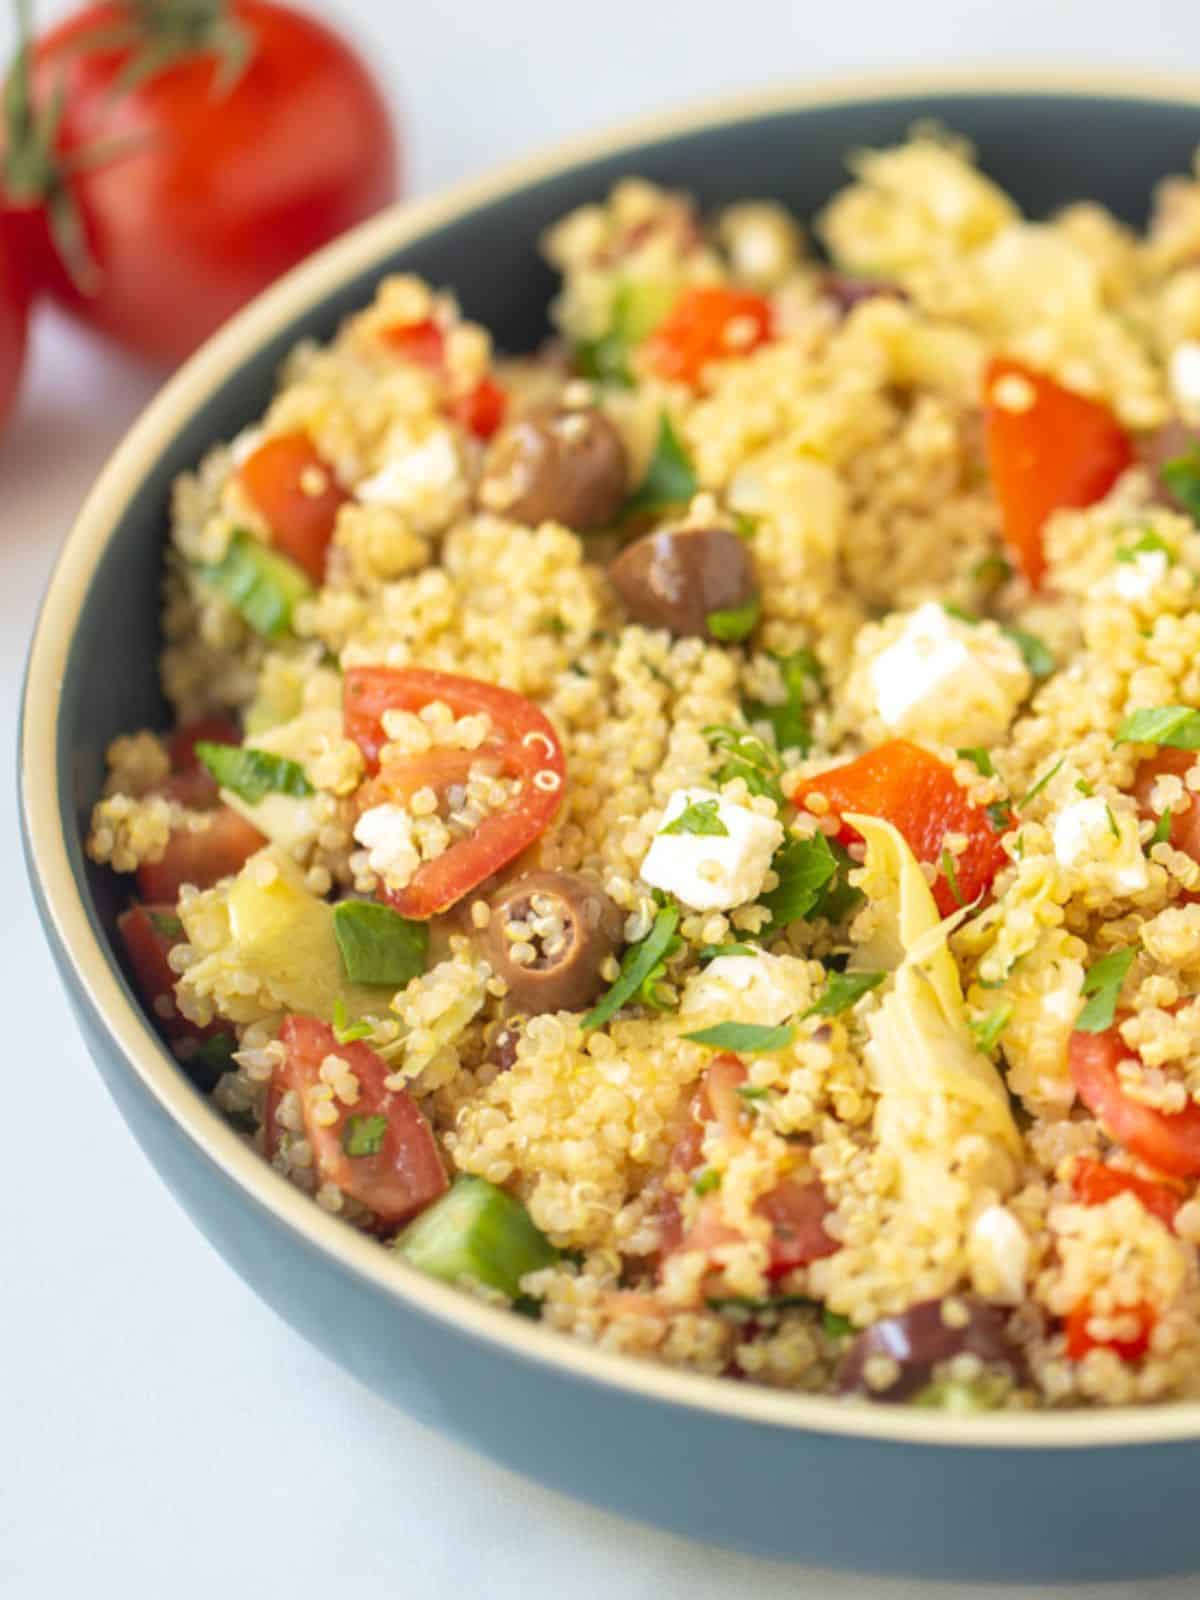 Bowl of Greek Quinoa Salad with parsley with tomatoes in the background.